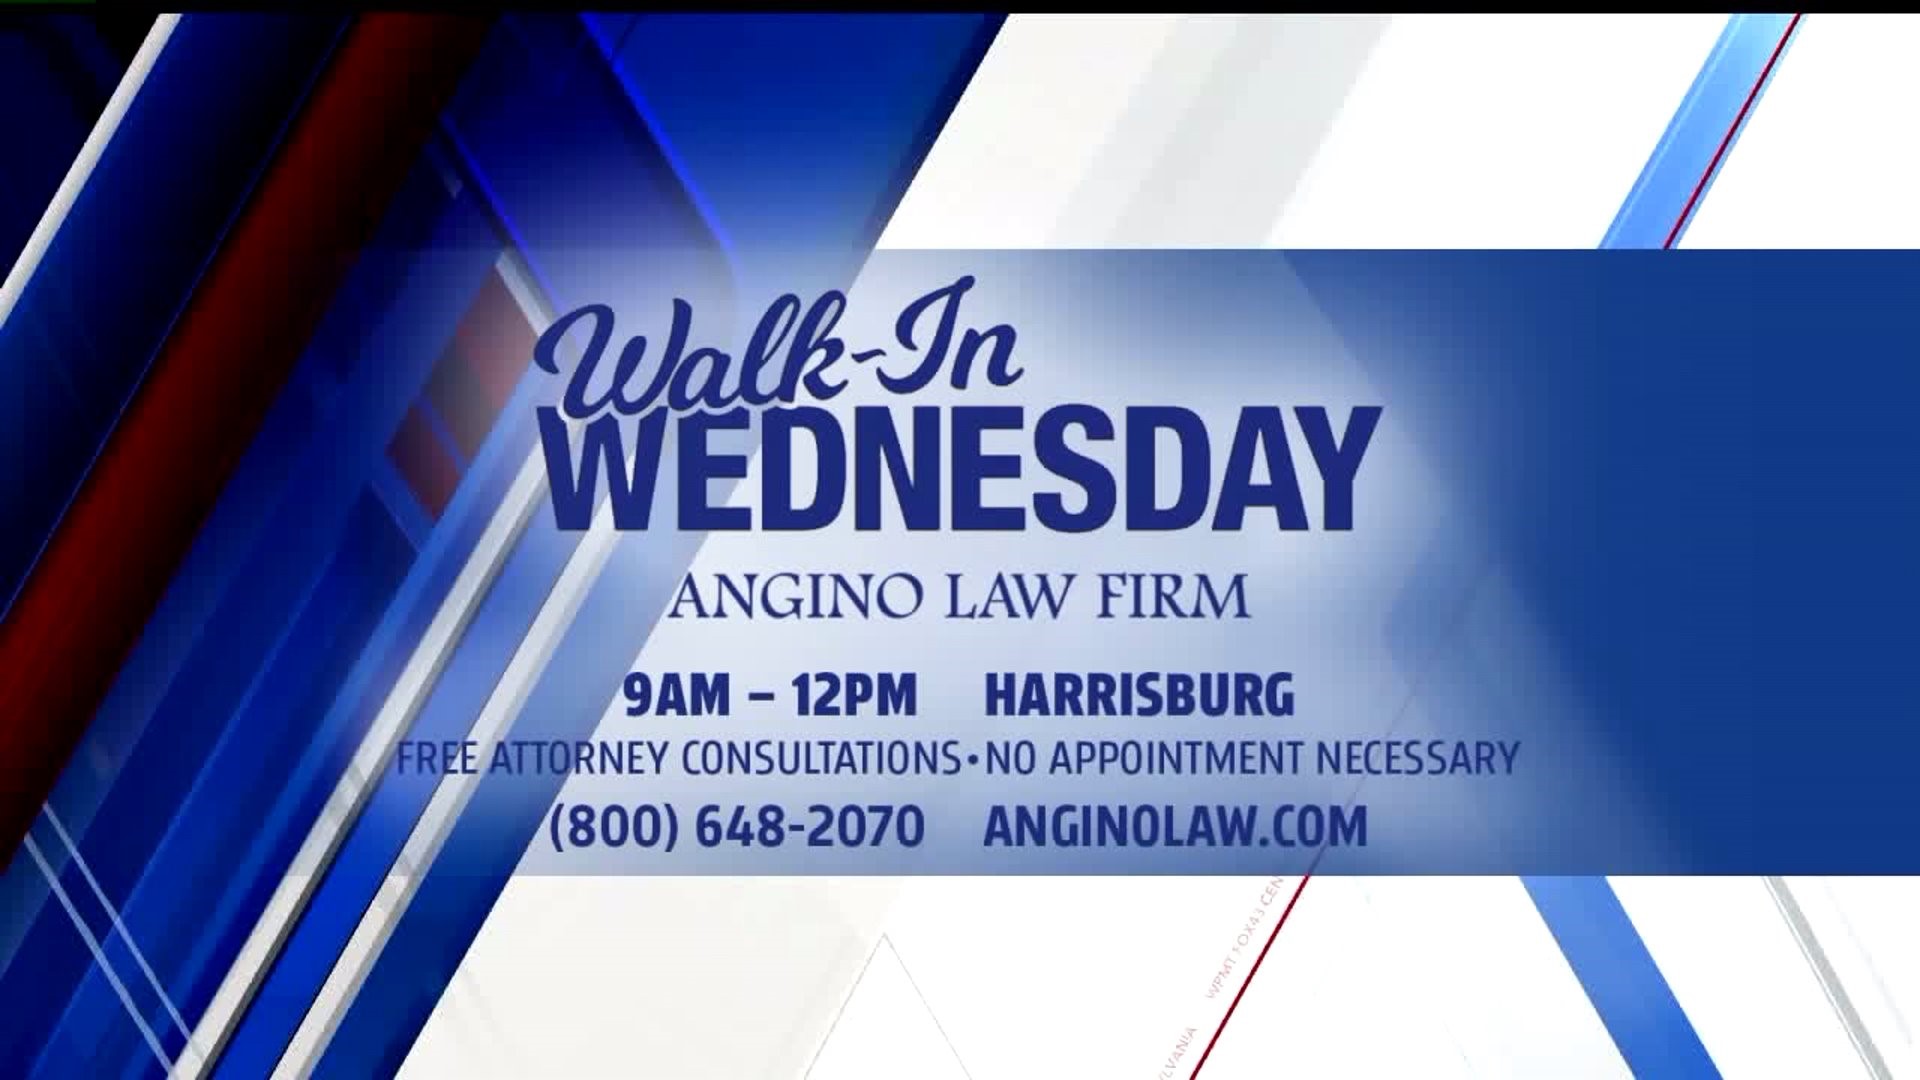 Walk-In Wednesdays provides the chance to have law questions answered